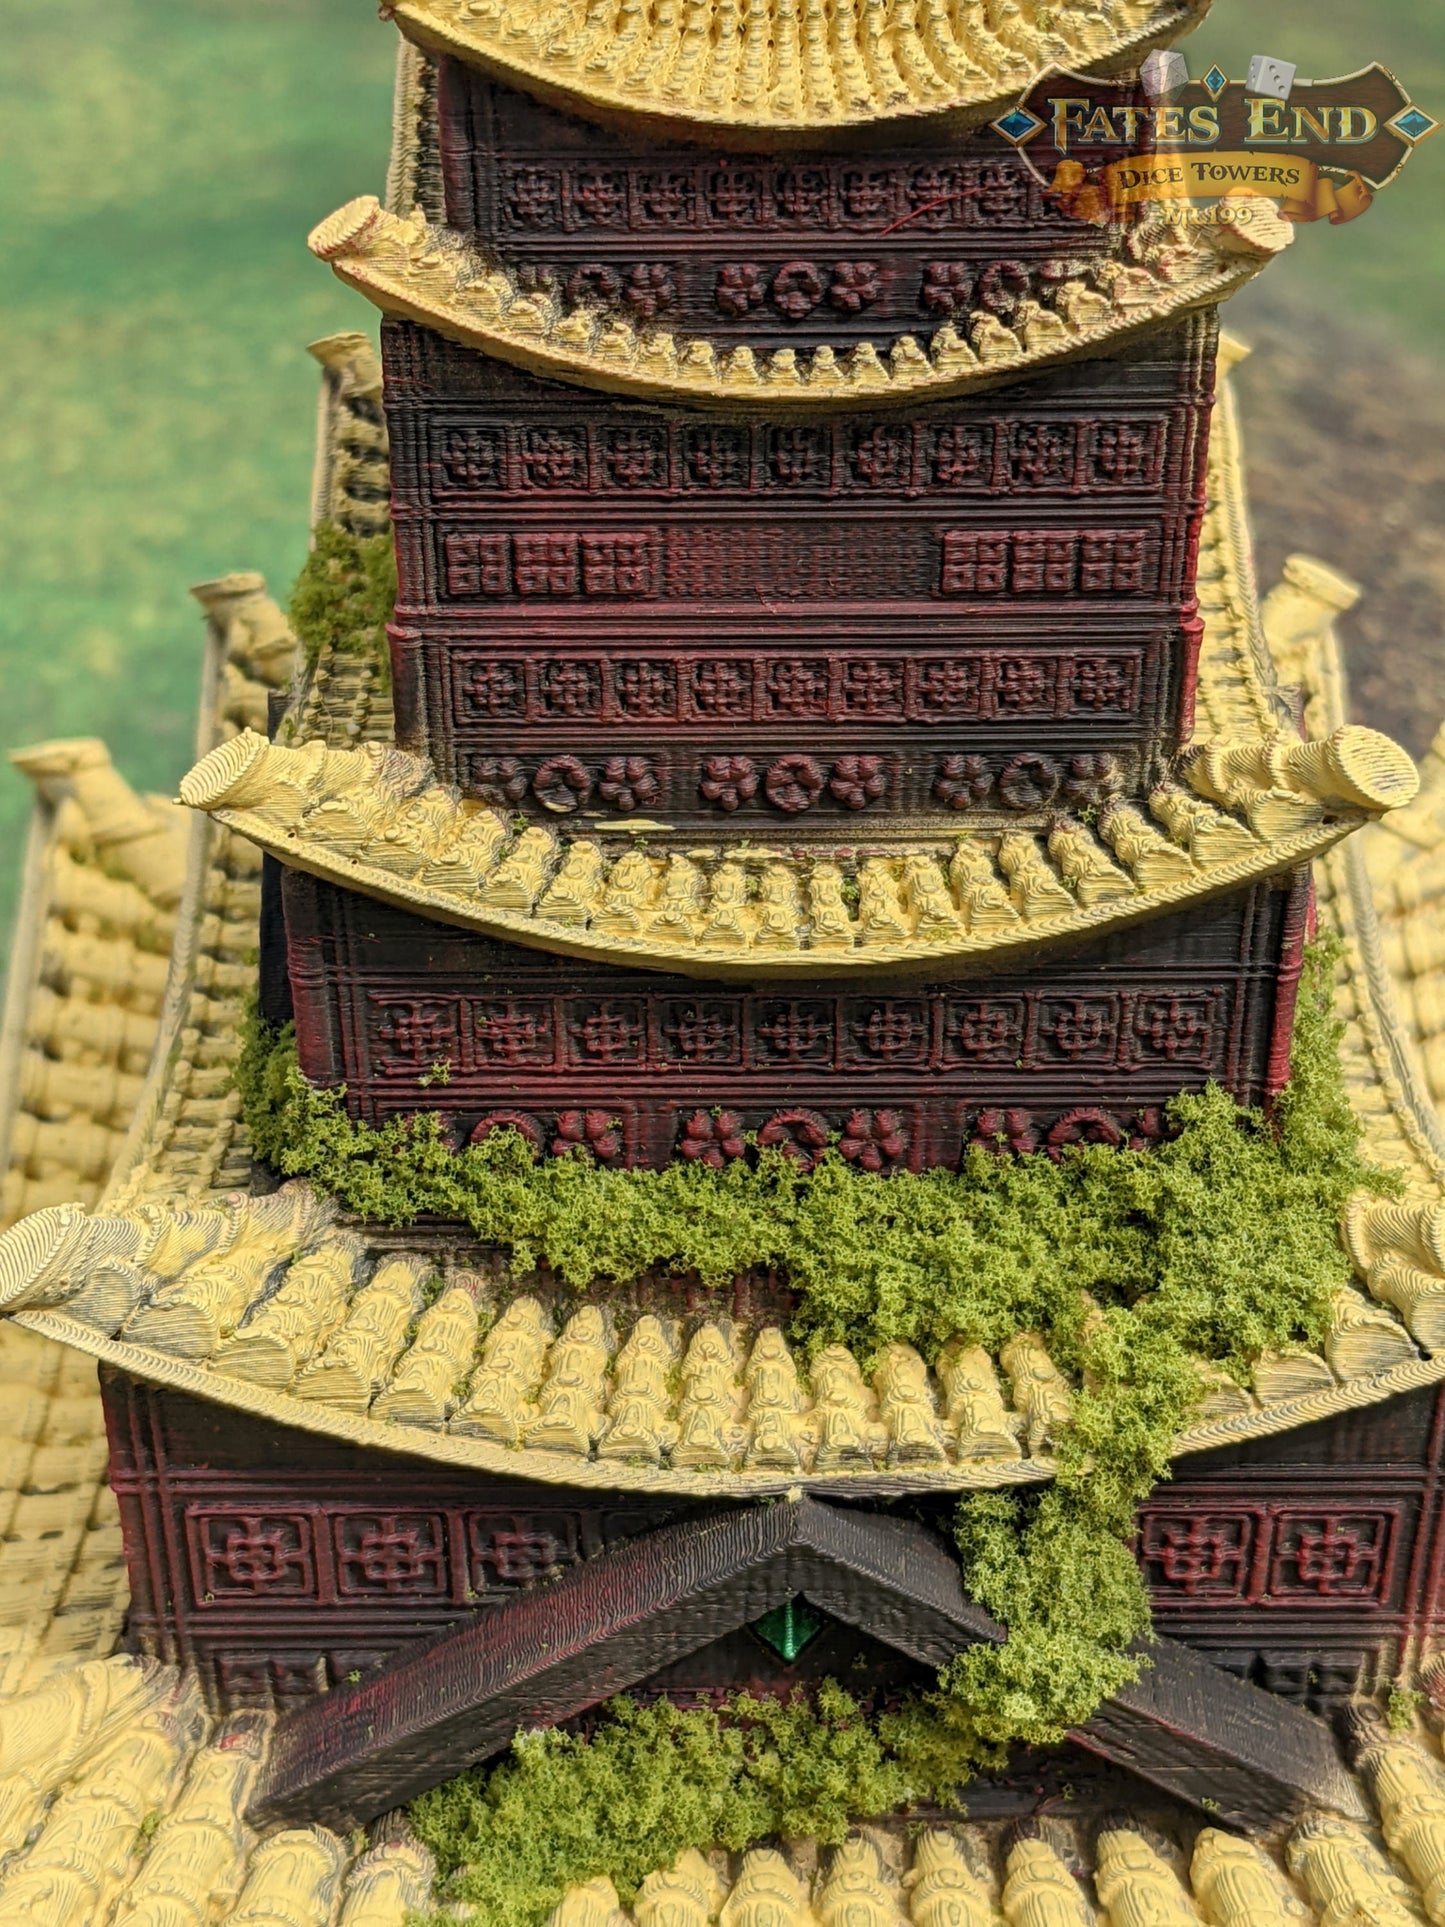 Pagoda Temple - 3D Printed Dice Tower - Fate's End Collection - Channel Serenity & Precision Rolls.